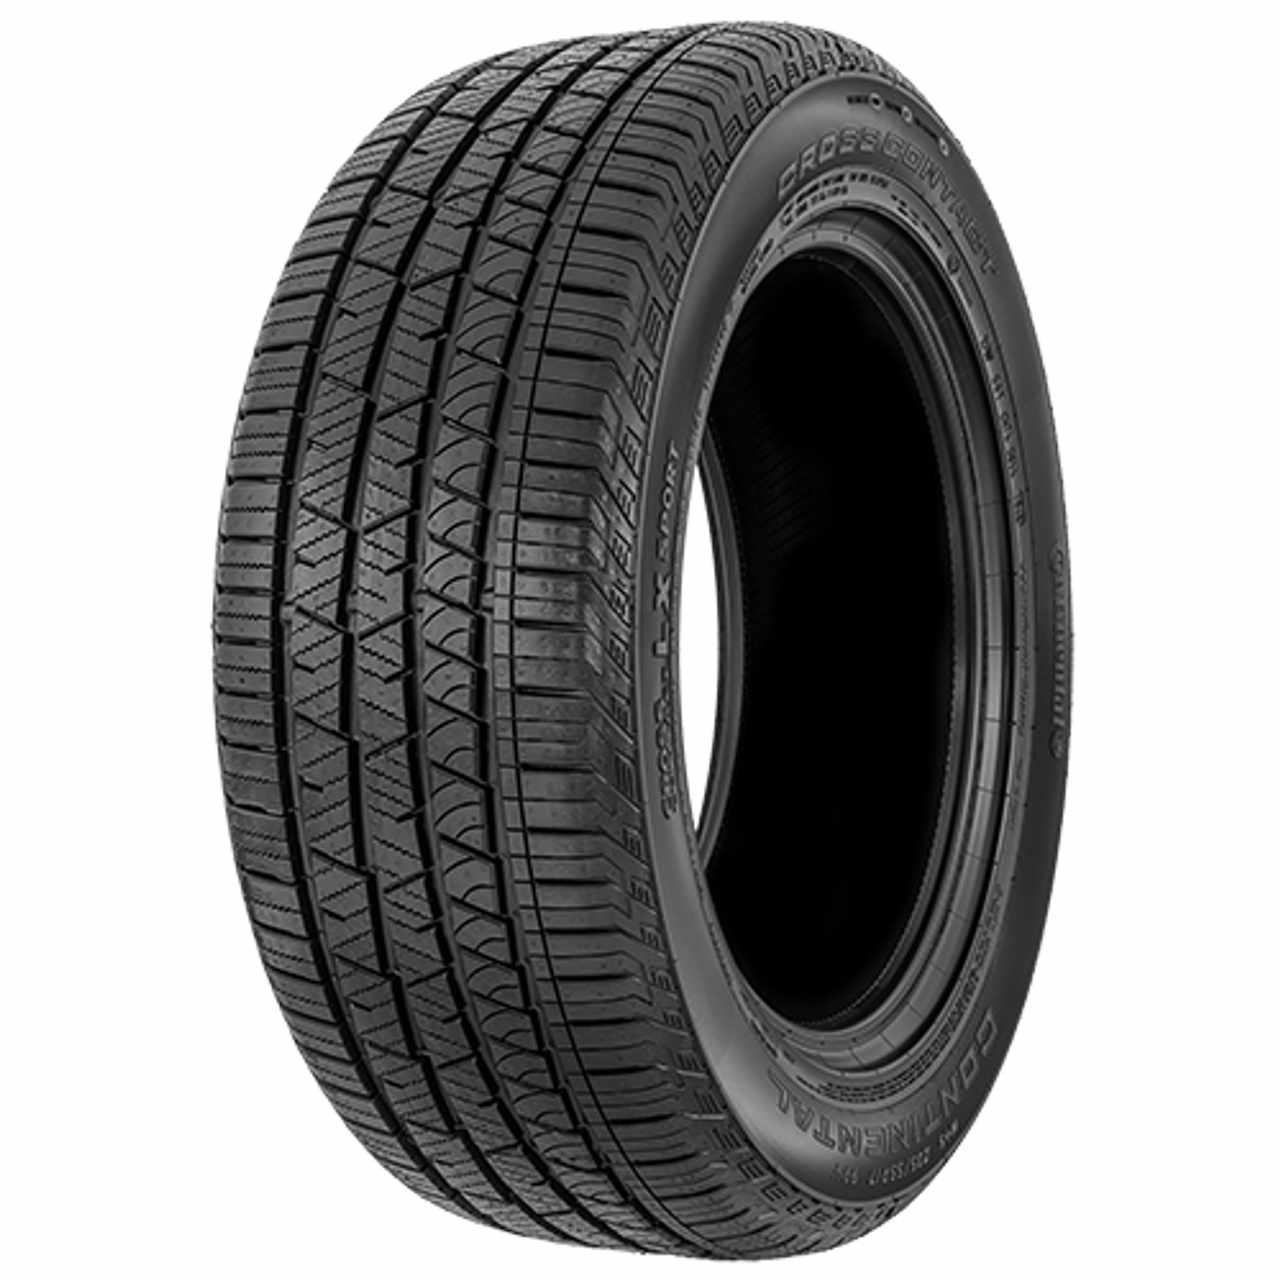 CONTINENTAL CROSSCONTACT LX SPORT (EVc) 245/50R20 102V FR BSW